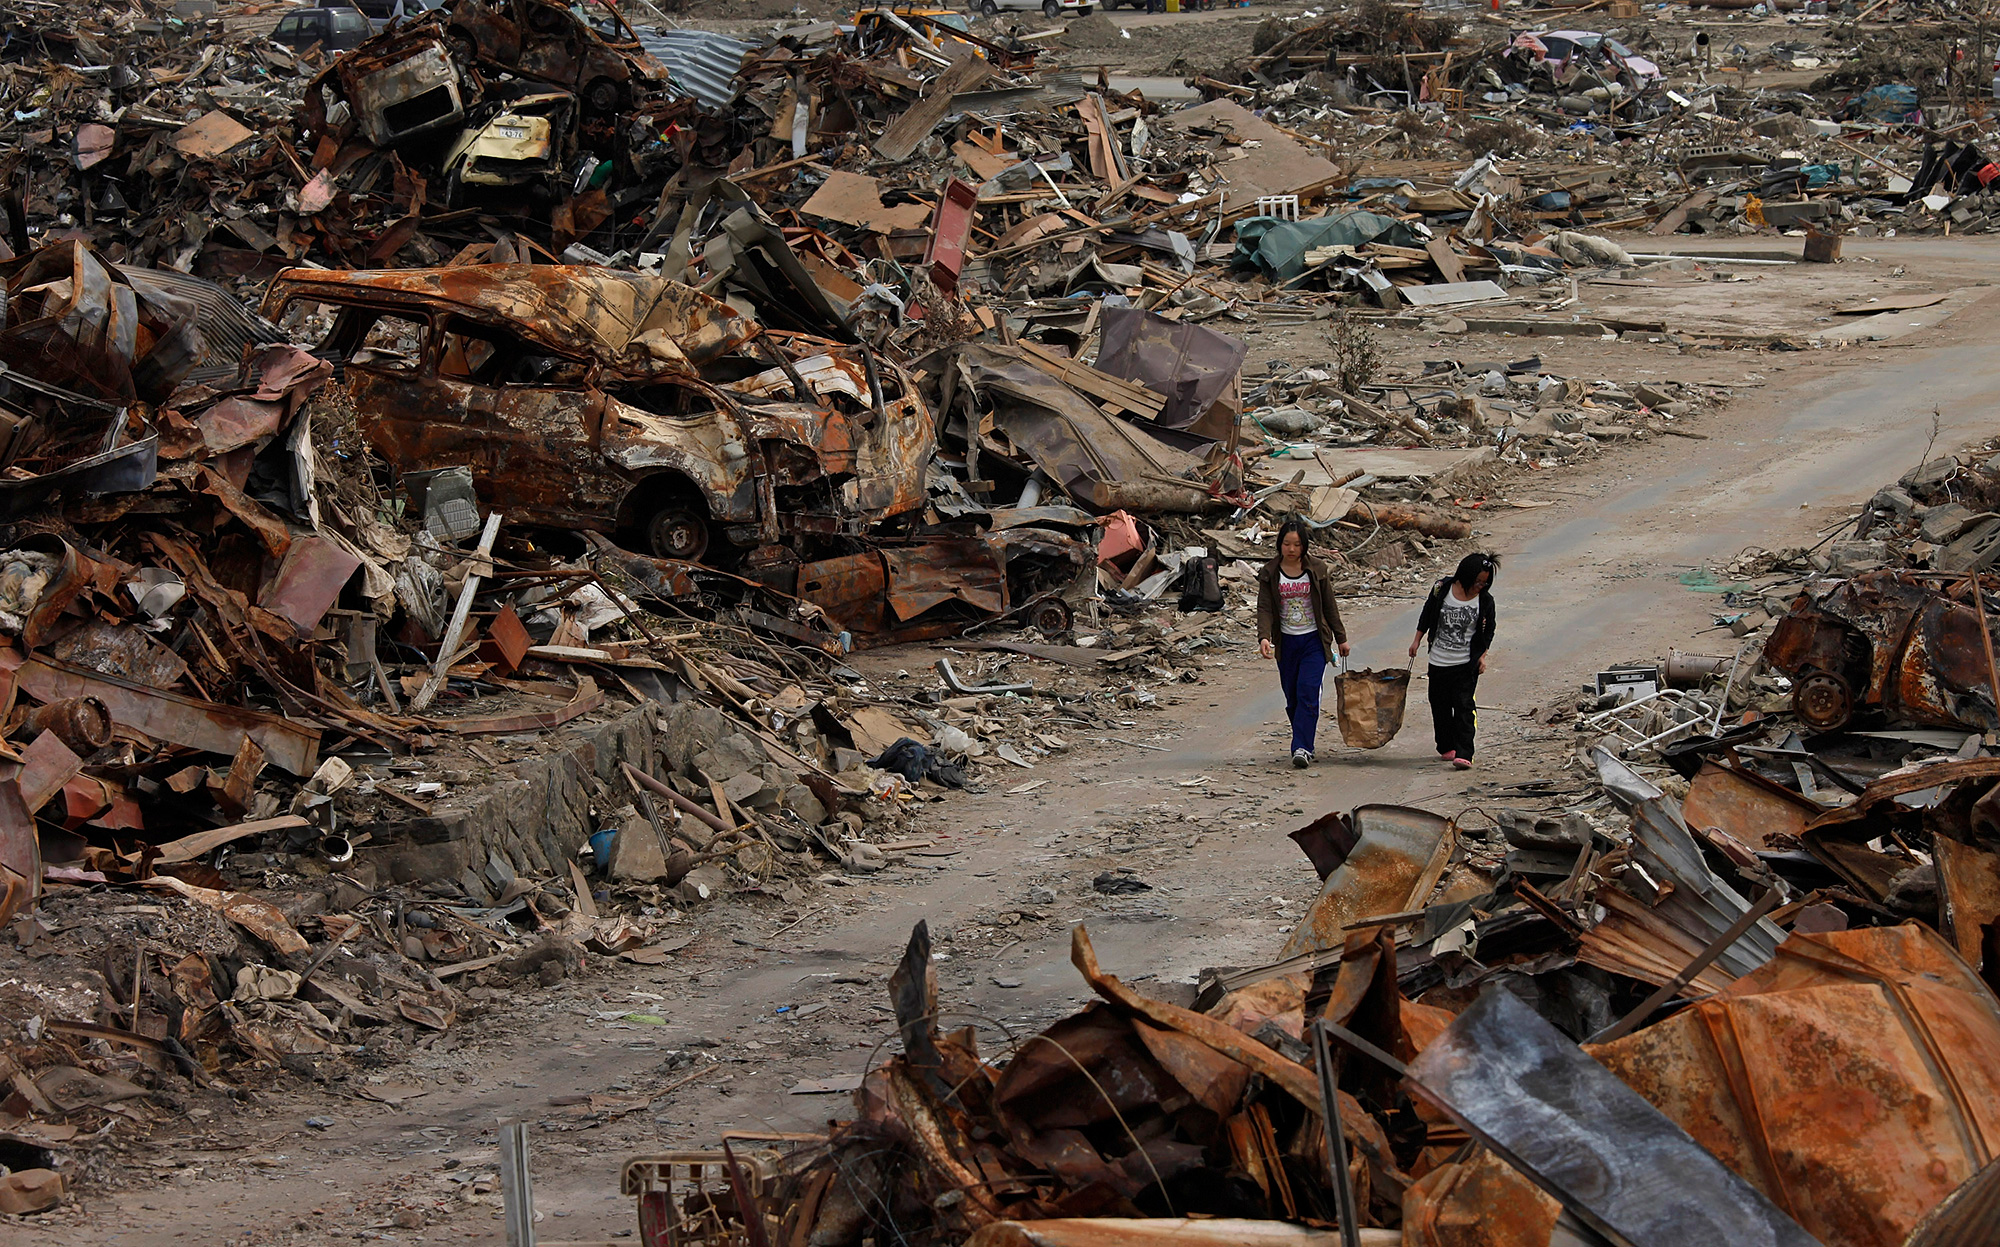 Two women walk past debris in an area devastated by the March 11 earthquake and tsunami in Ishinomaki, Japan, on April 7, 2011.